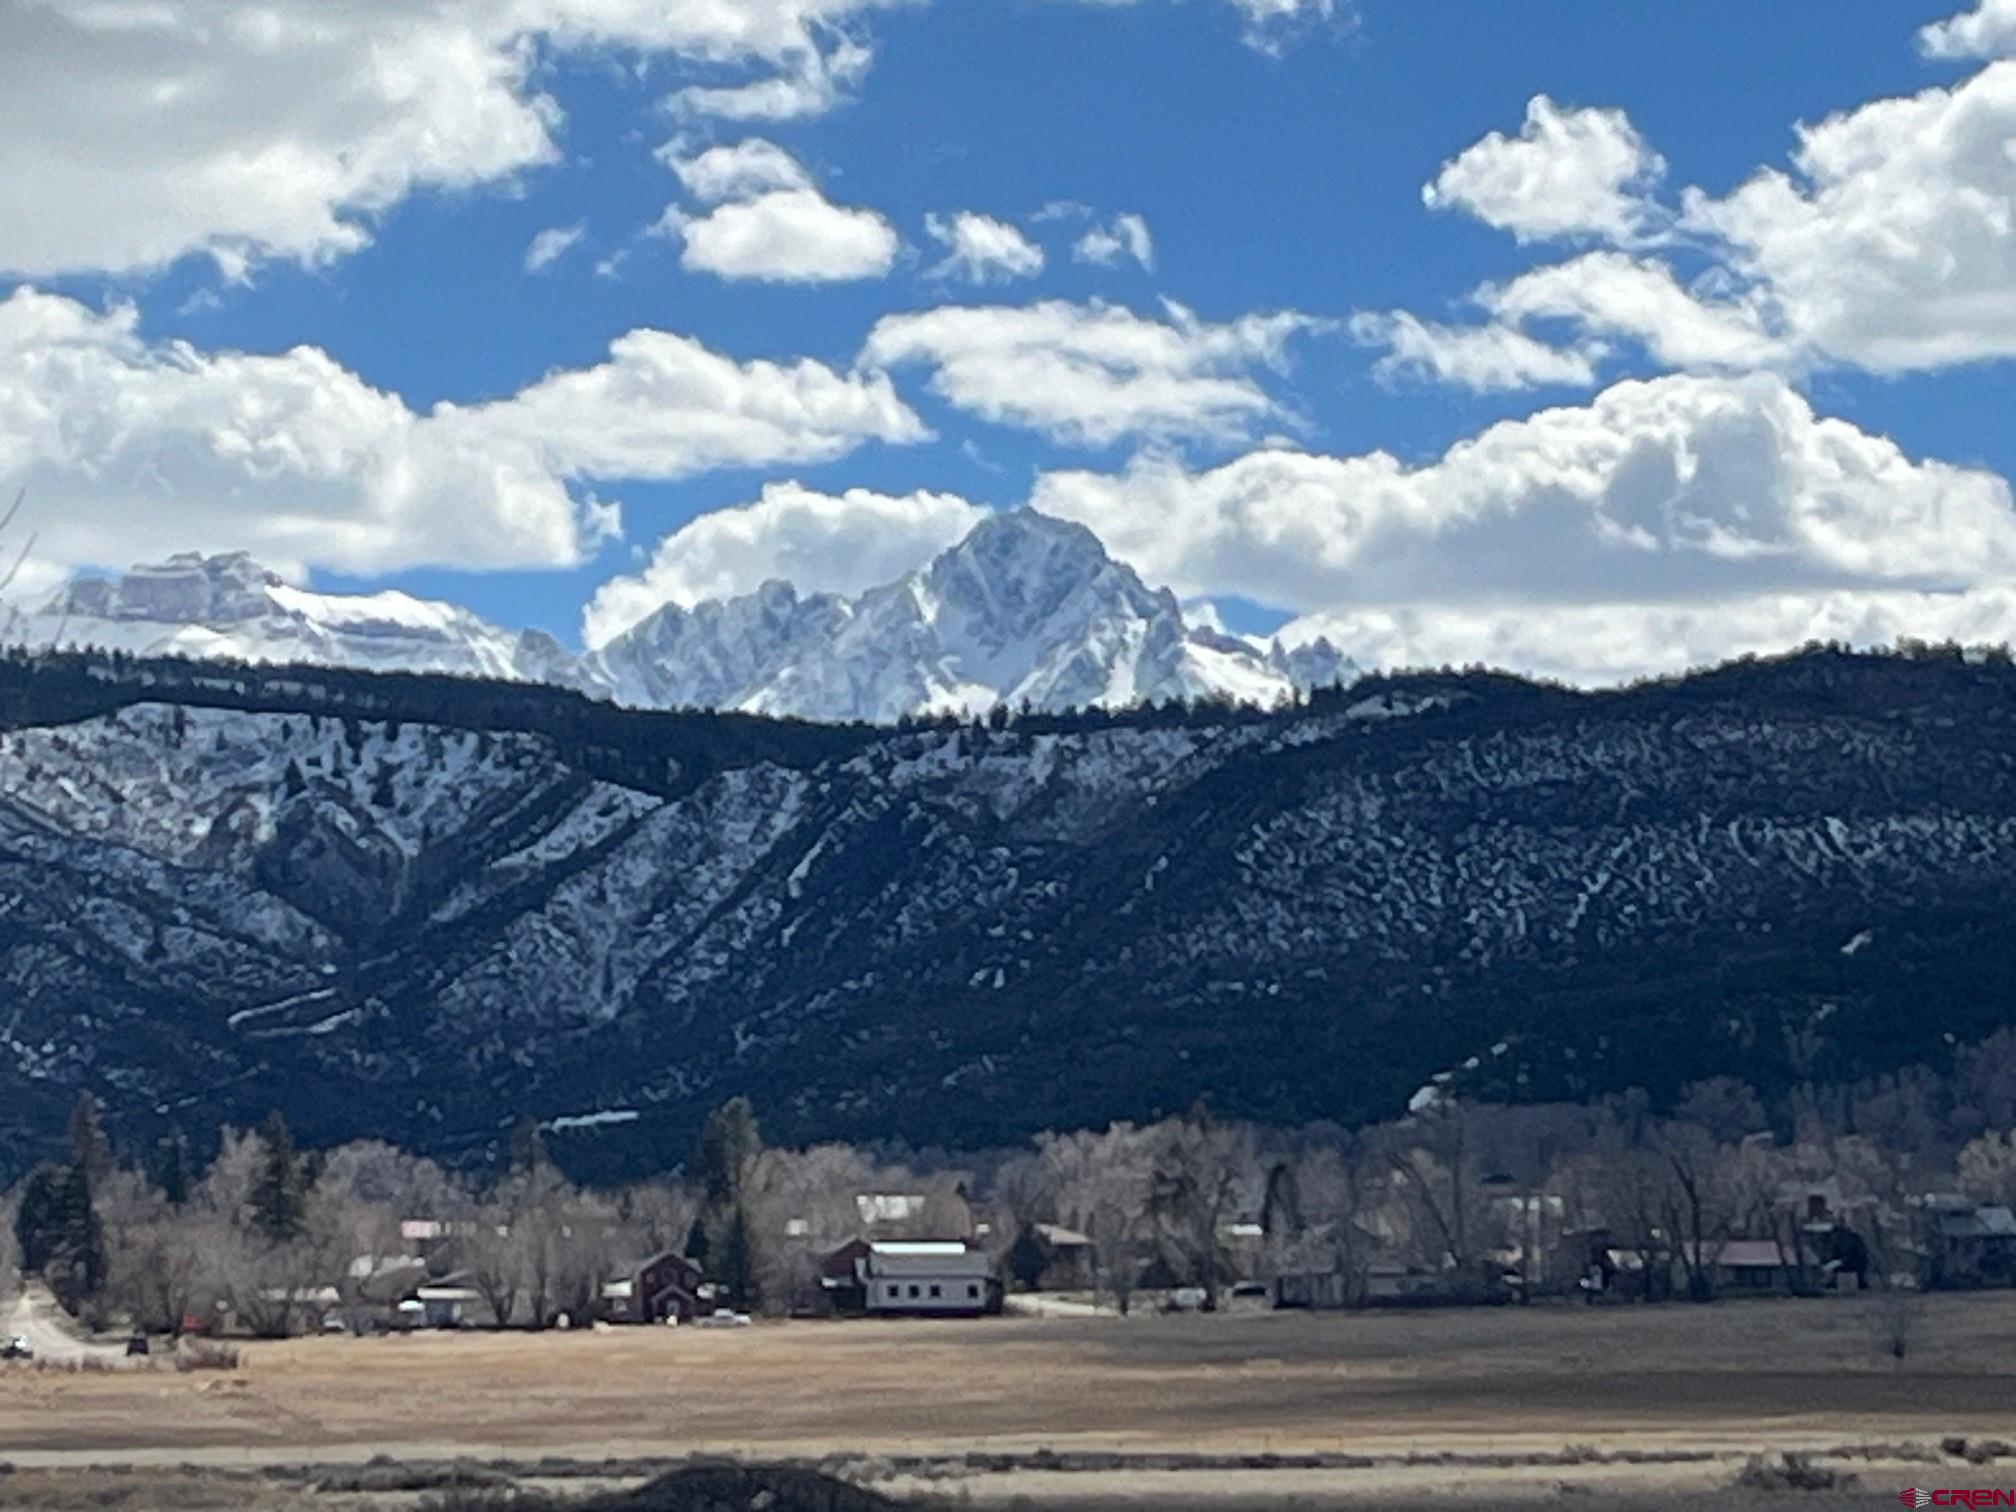 Lot 11 Parkside in lovely Ridgway CO is ready for your dream home. Amazing views with all utilities to the lot line. $3000 paid toward the water tap and $4000 toward the sewer tap ($3000 and $2000 respectively due to tap). Great location with paved streets and pathways out the door. Nicely priced and ready to roll.  ADU's are permitted.